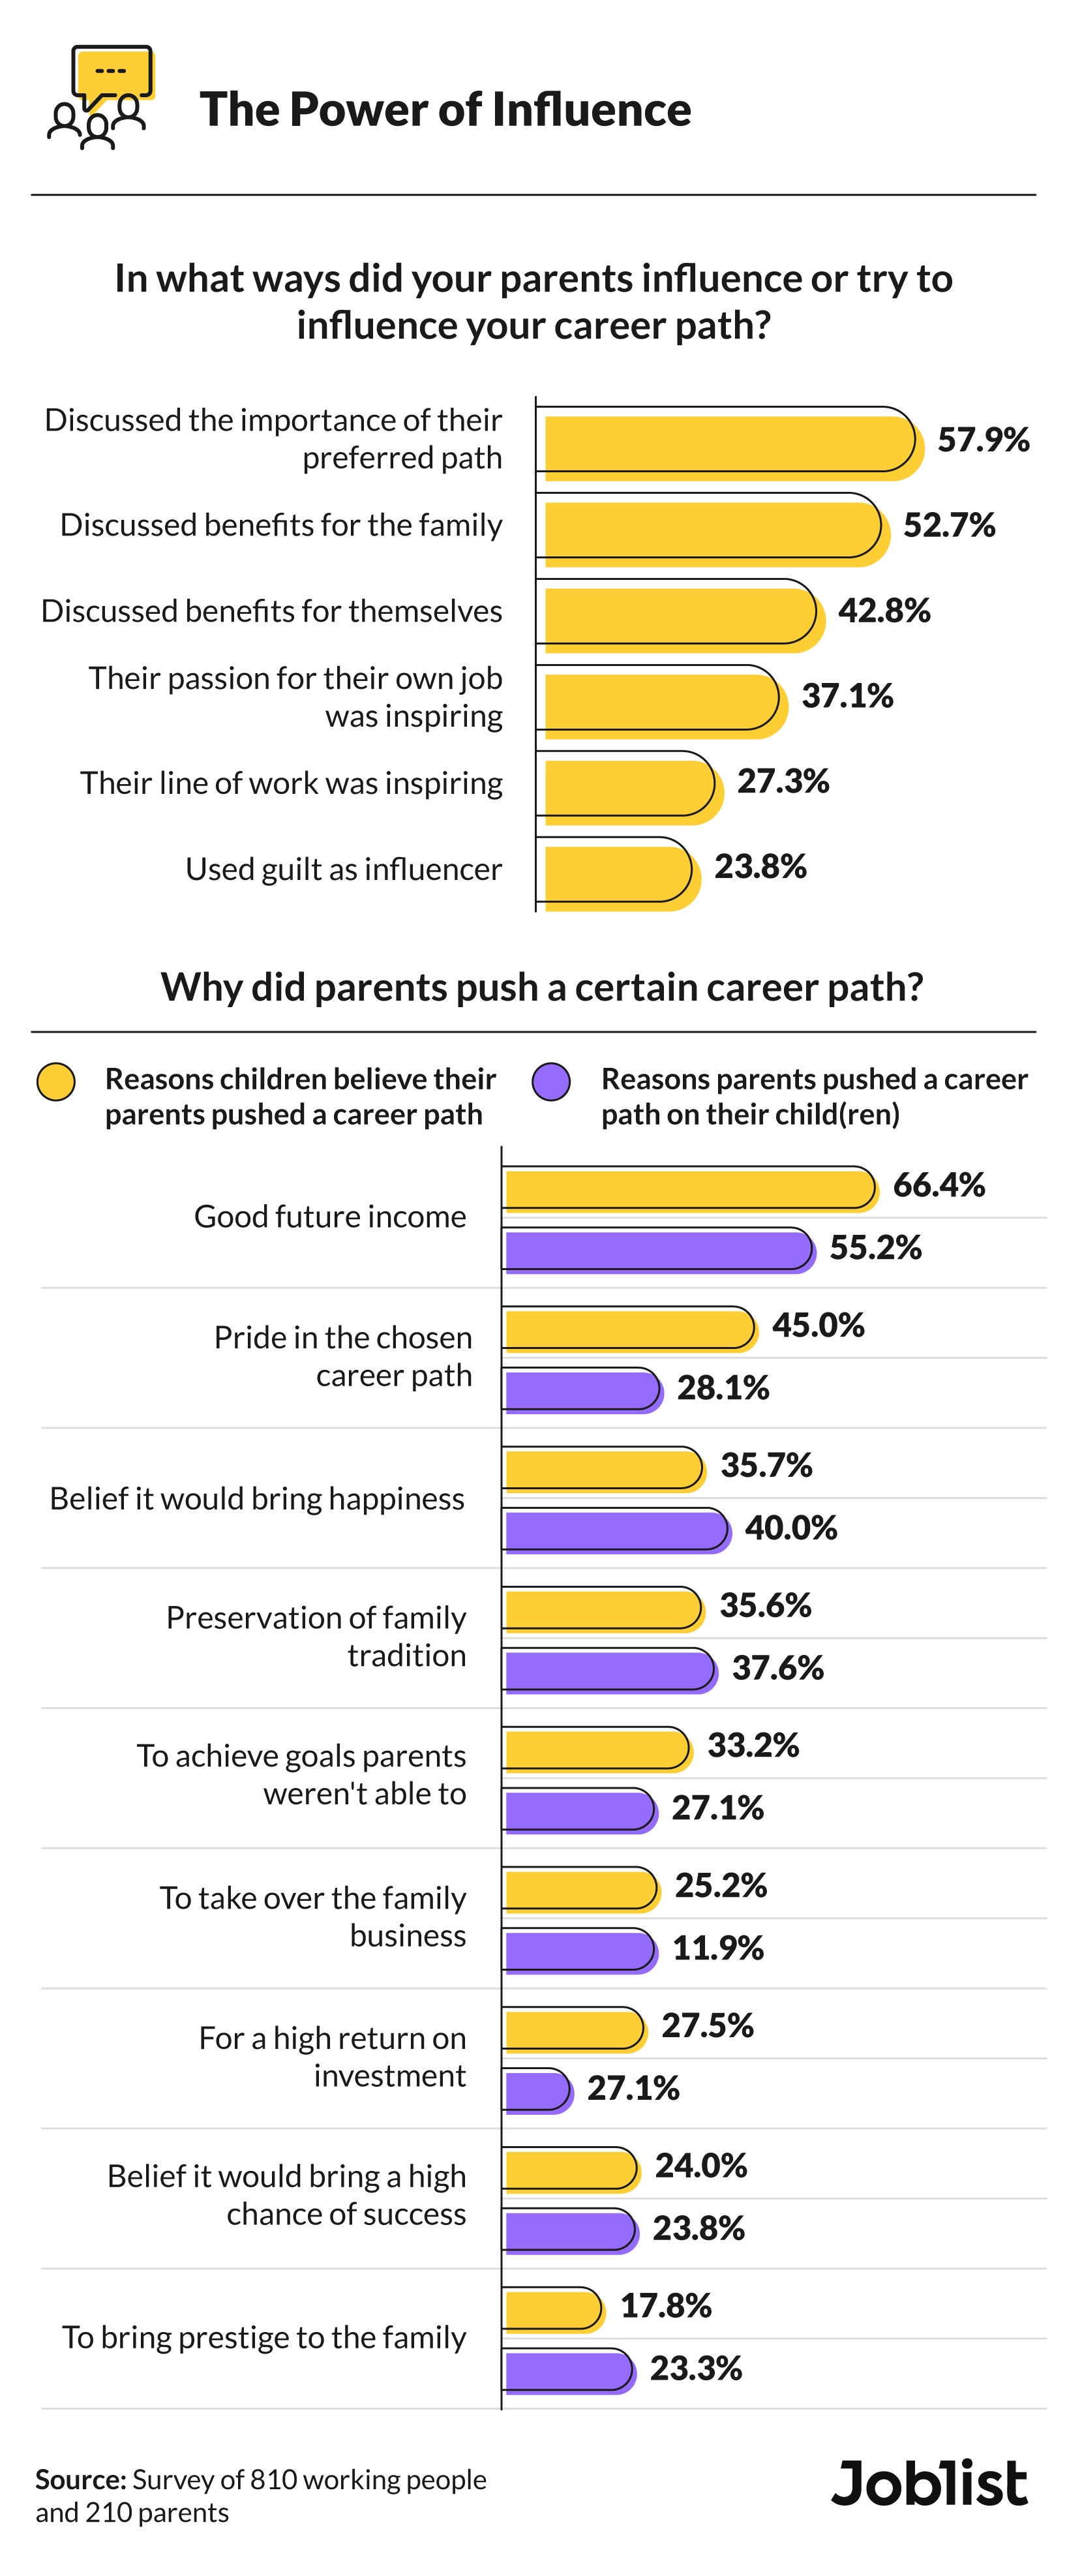 Ways and reasons parents influence career paths